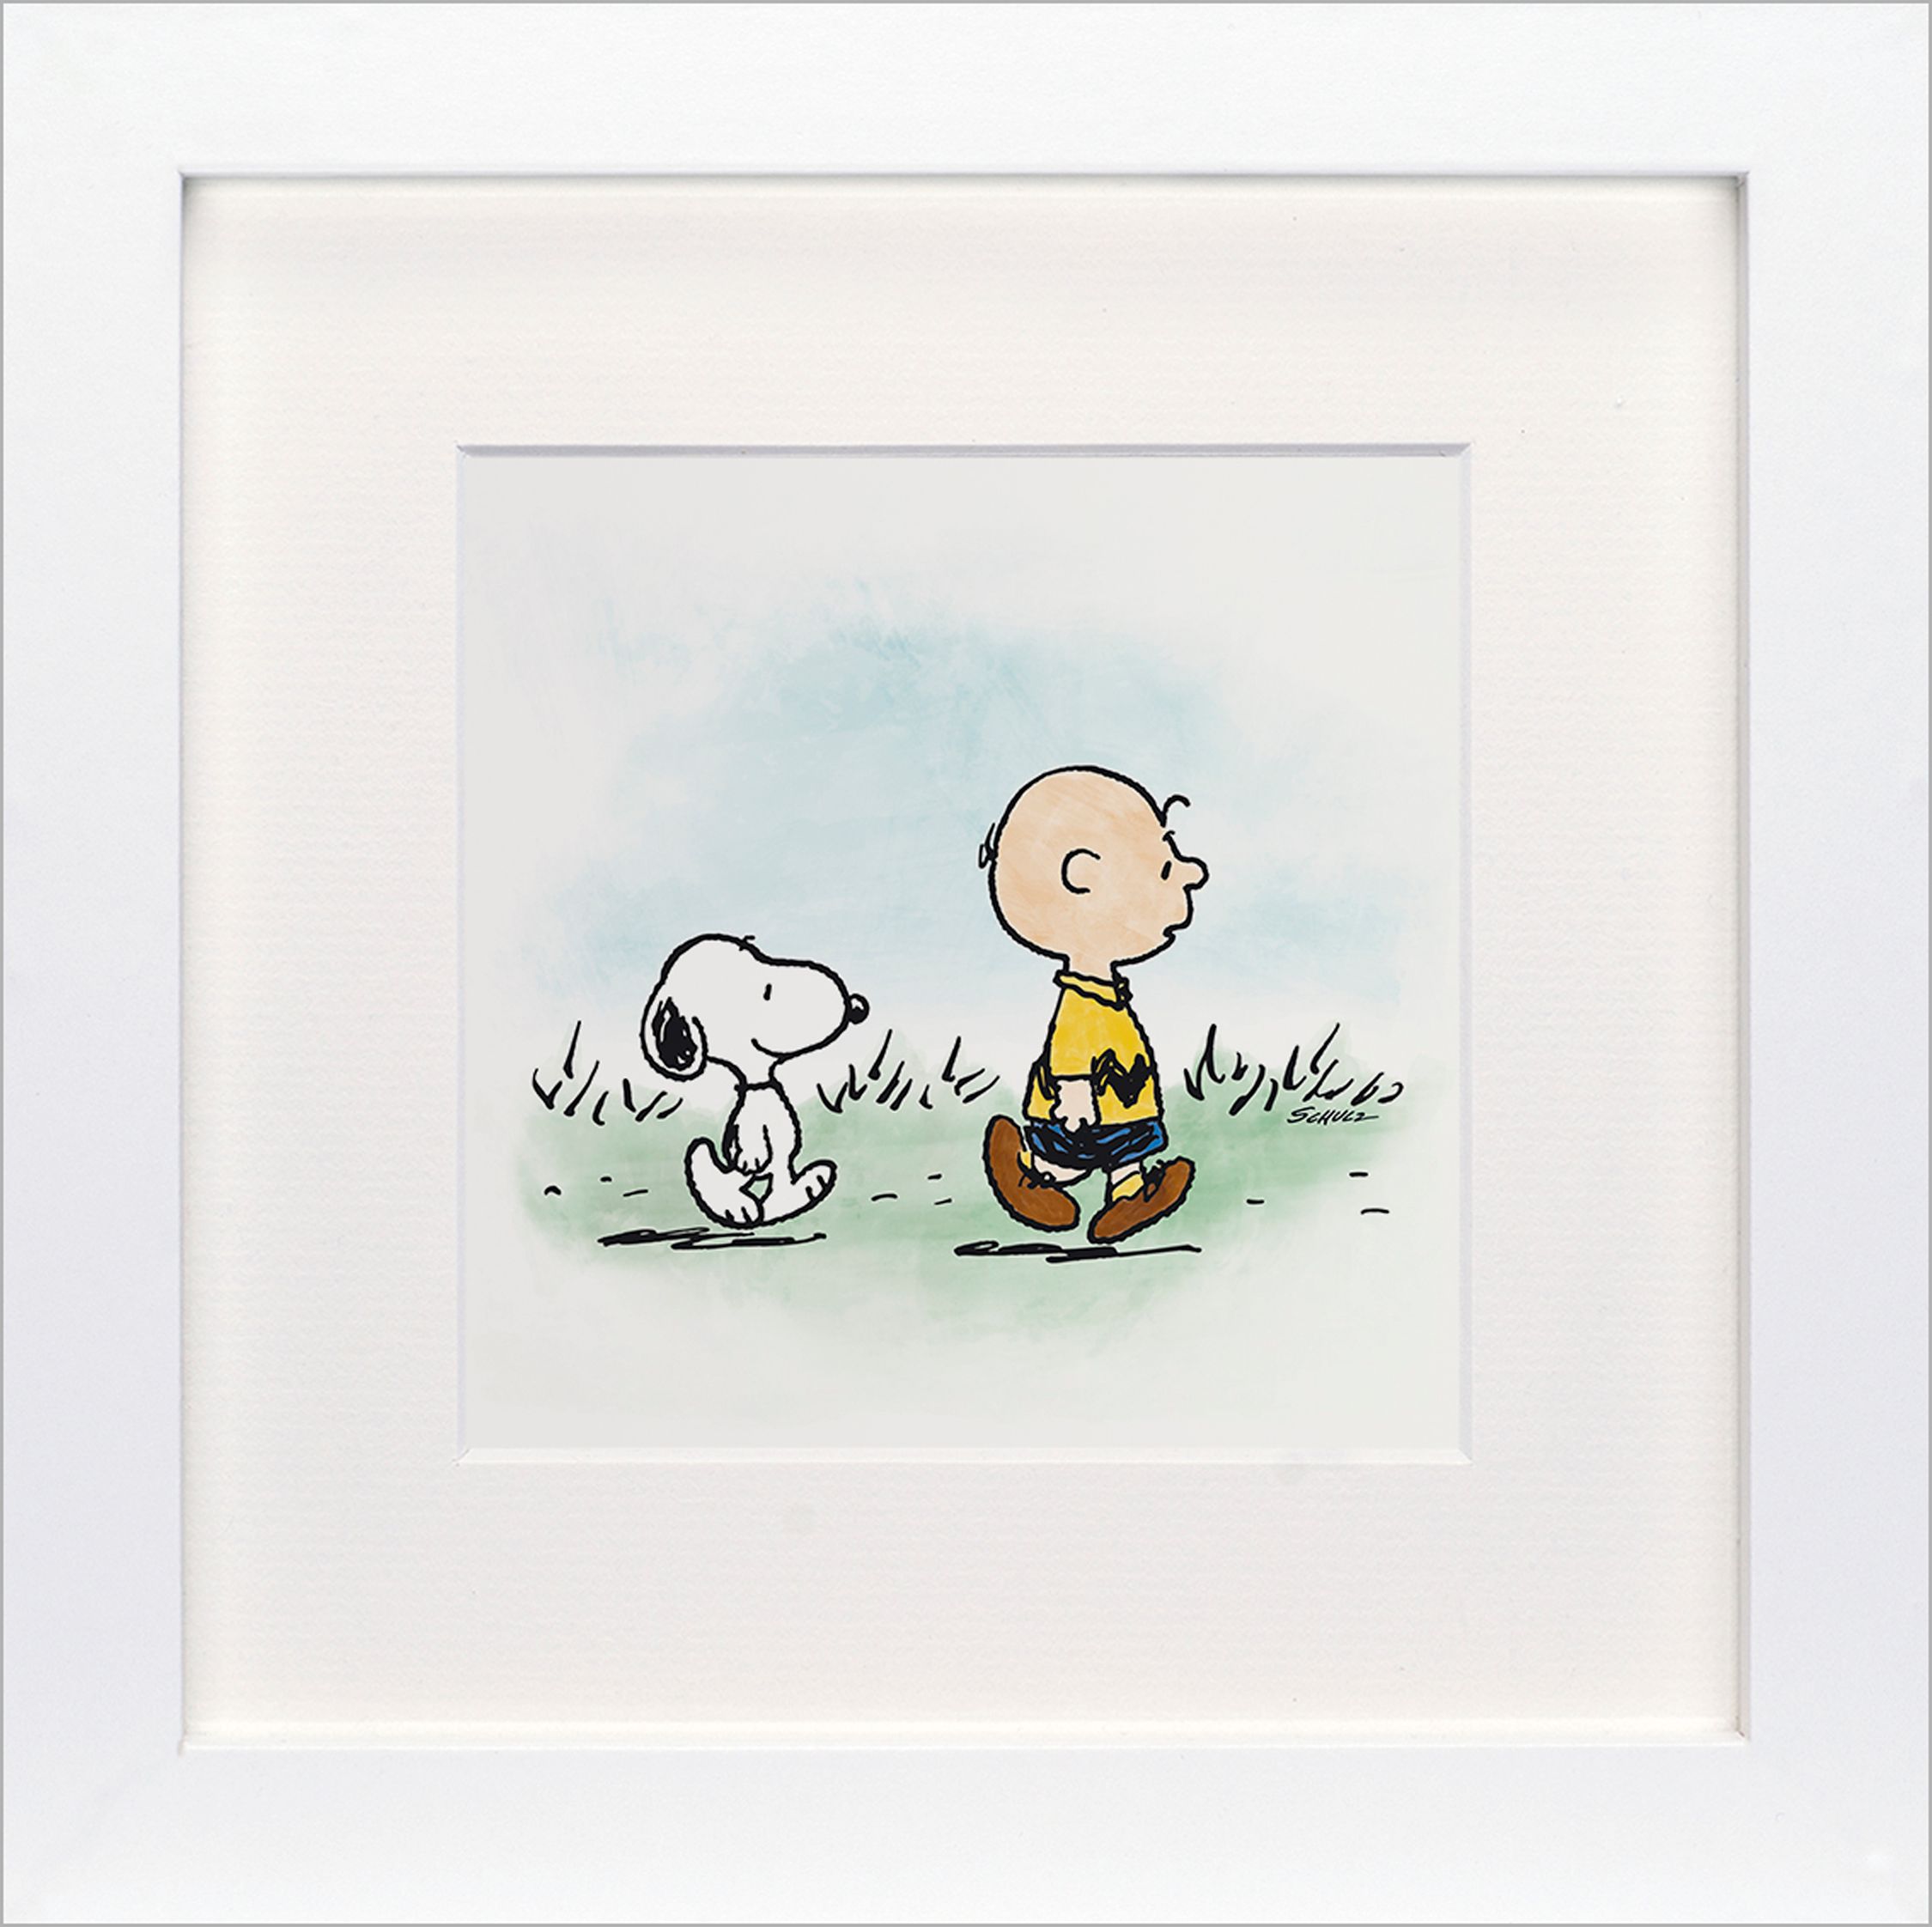 Schulz - Charlie Brown and Print, x 23cm